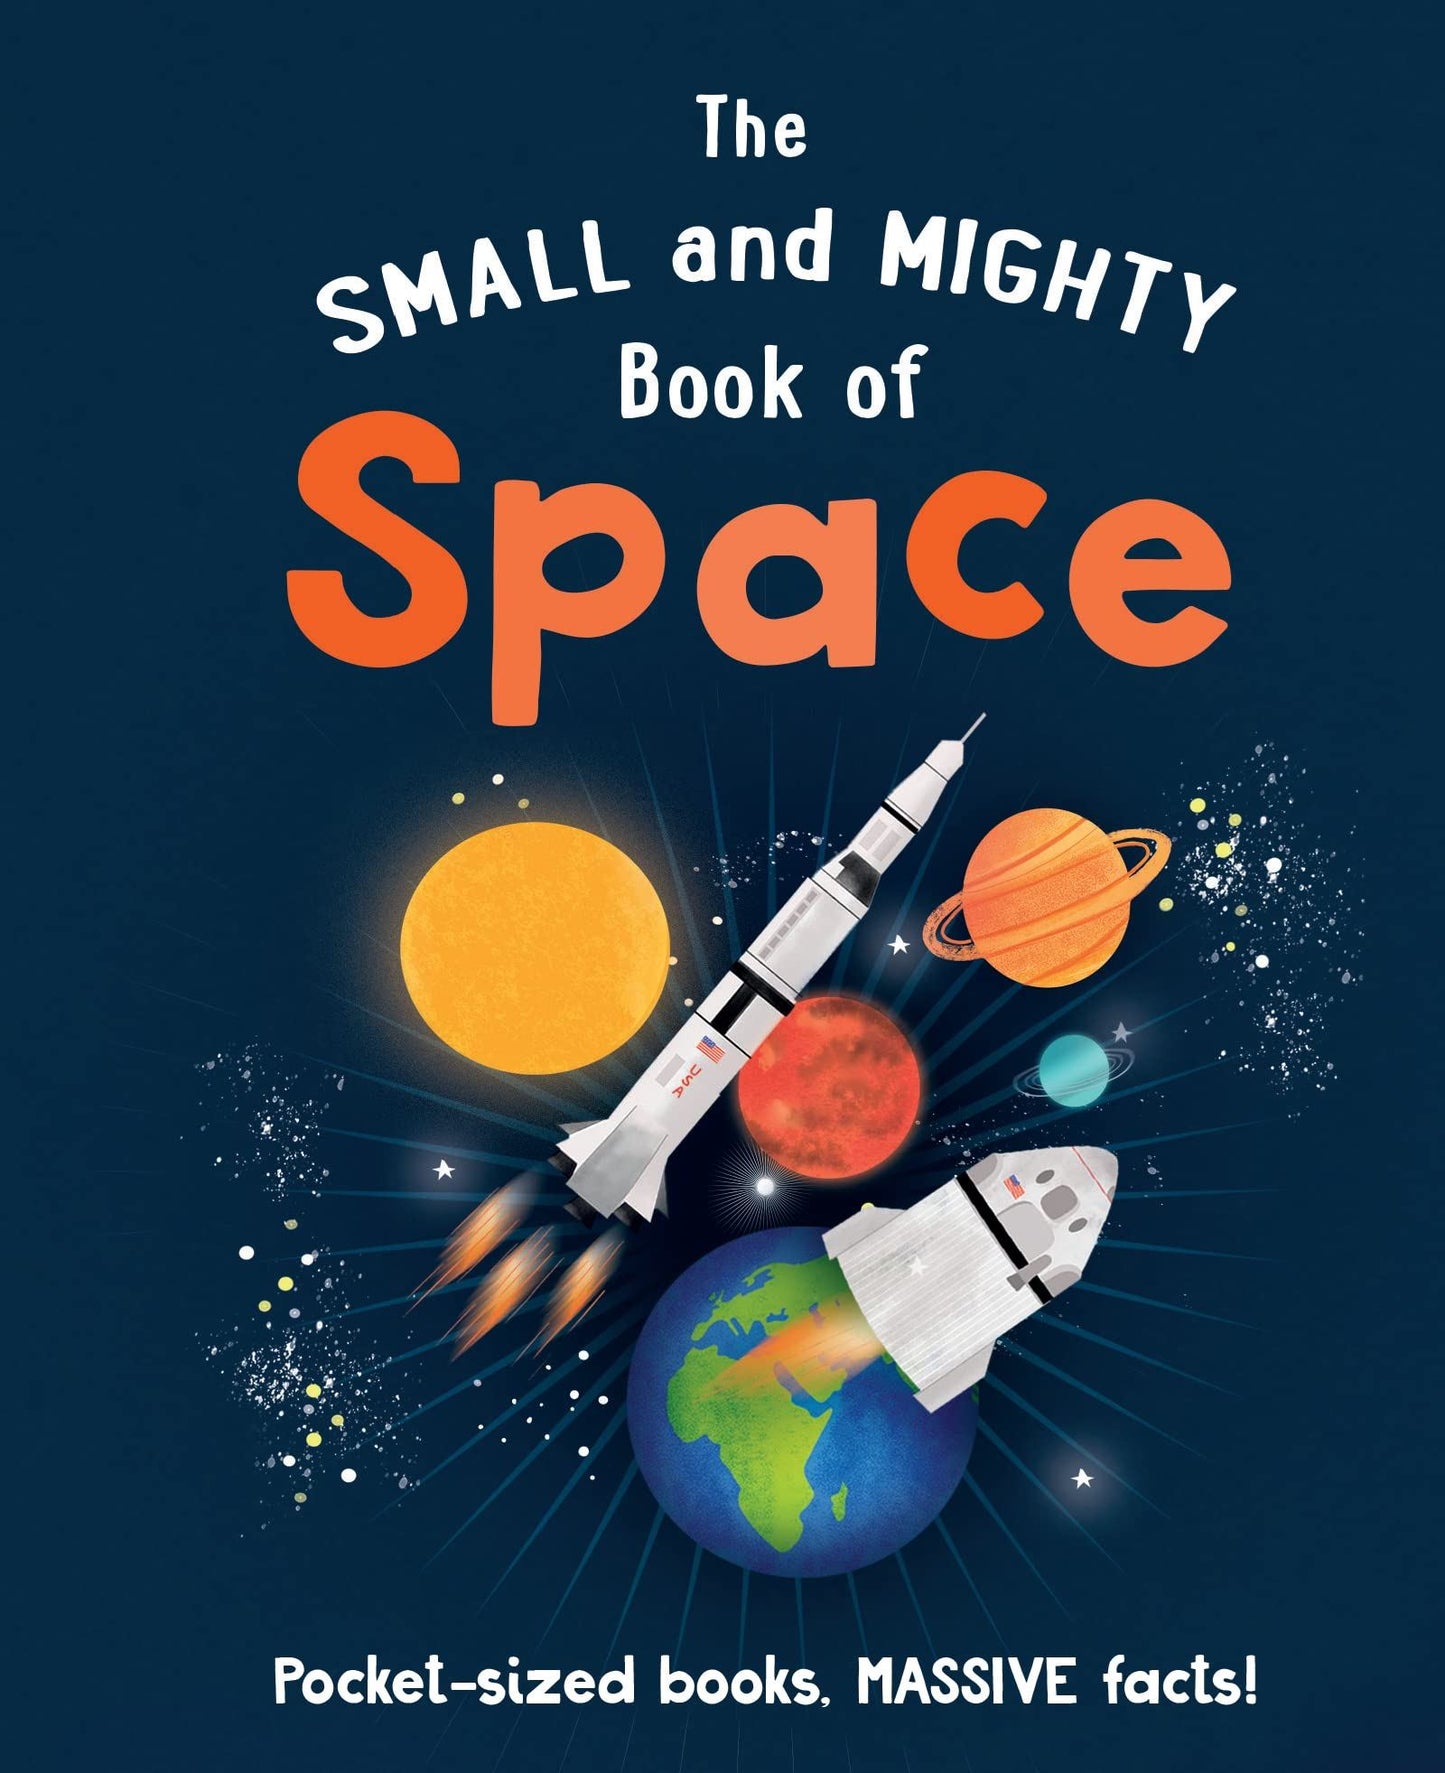 Small and Mighty Book of Space